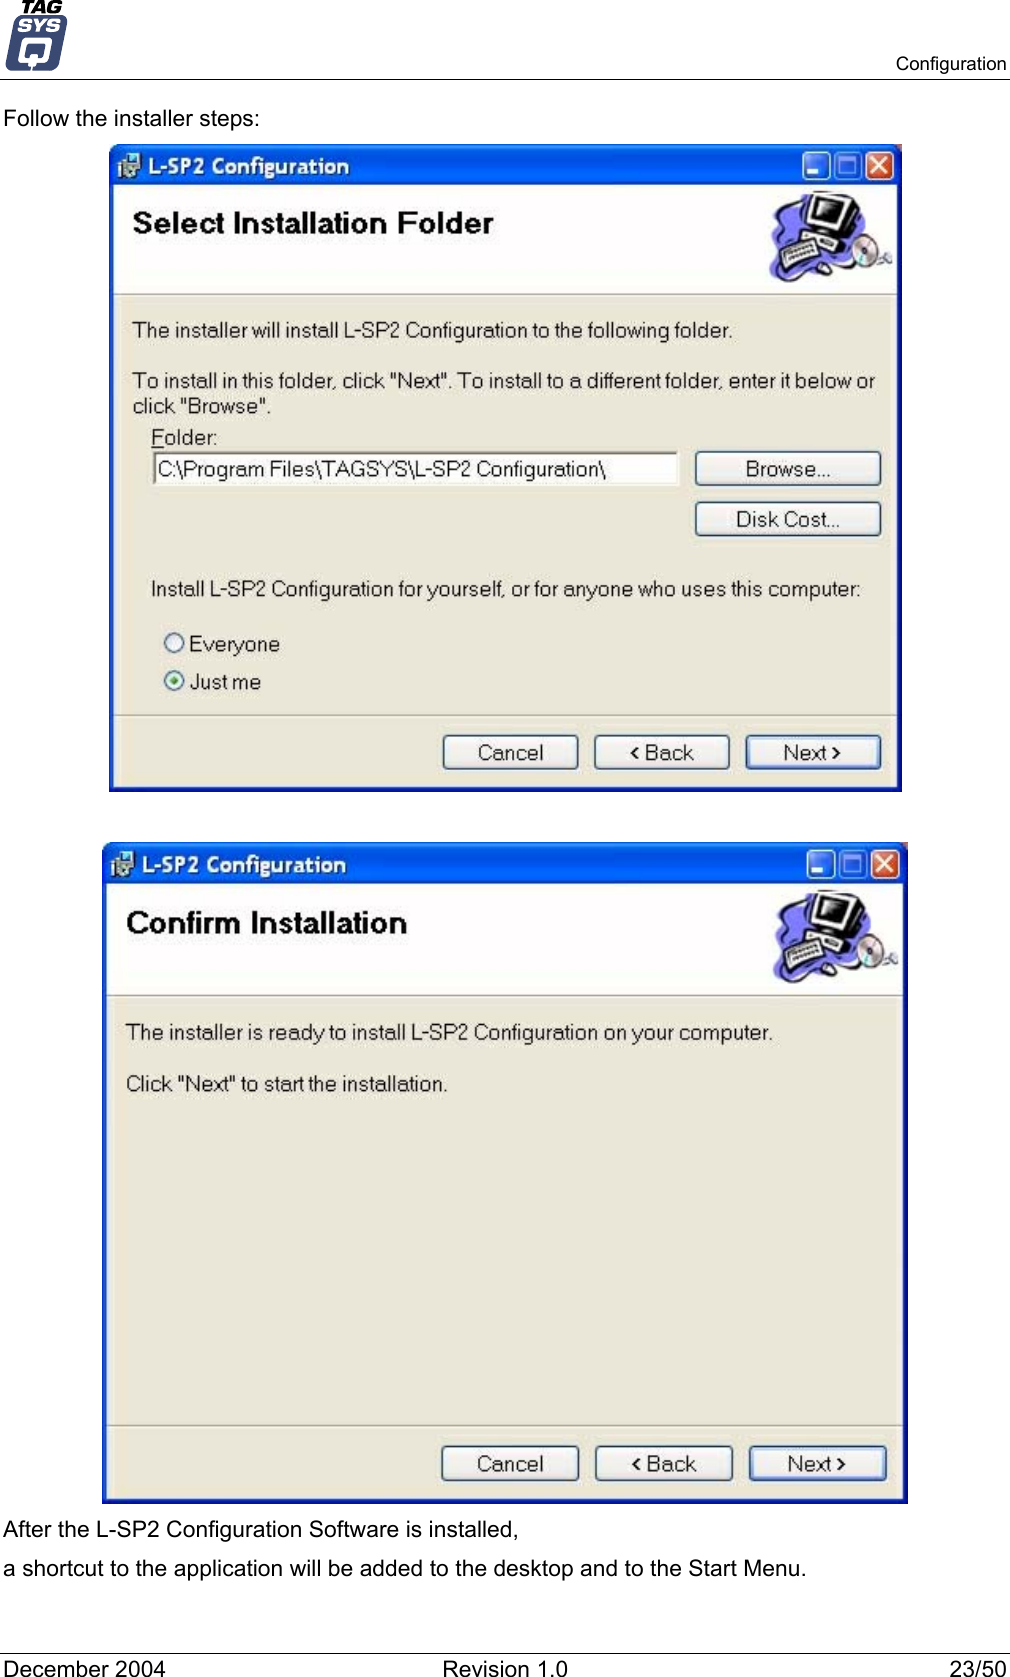   Configuration Follow the installer steps:    After the L-SP2 Configuration Software is installed, a shortcut to the application will be added to the desktop and to the Start Menu. December 2004  Revision 1.0  23/50 